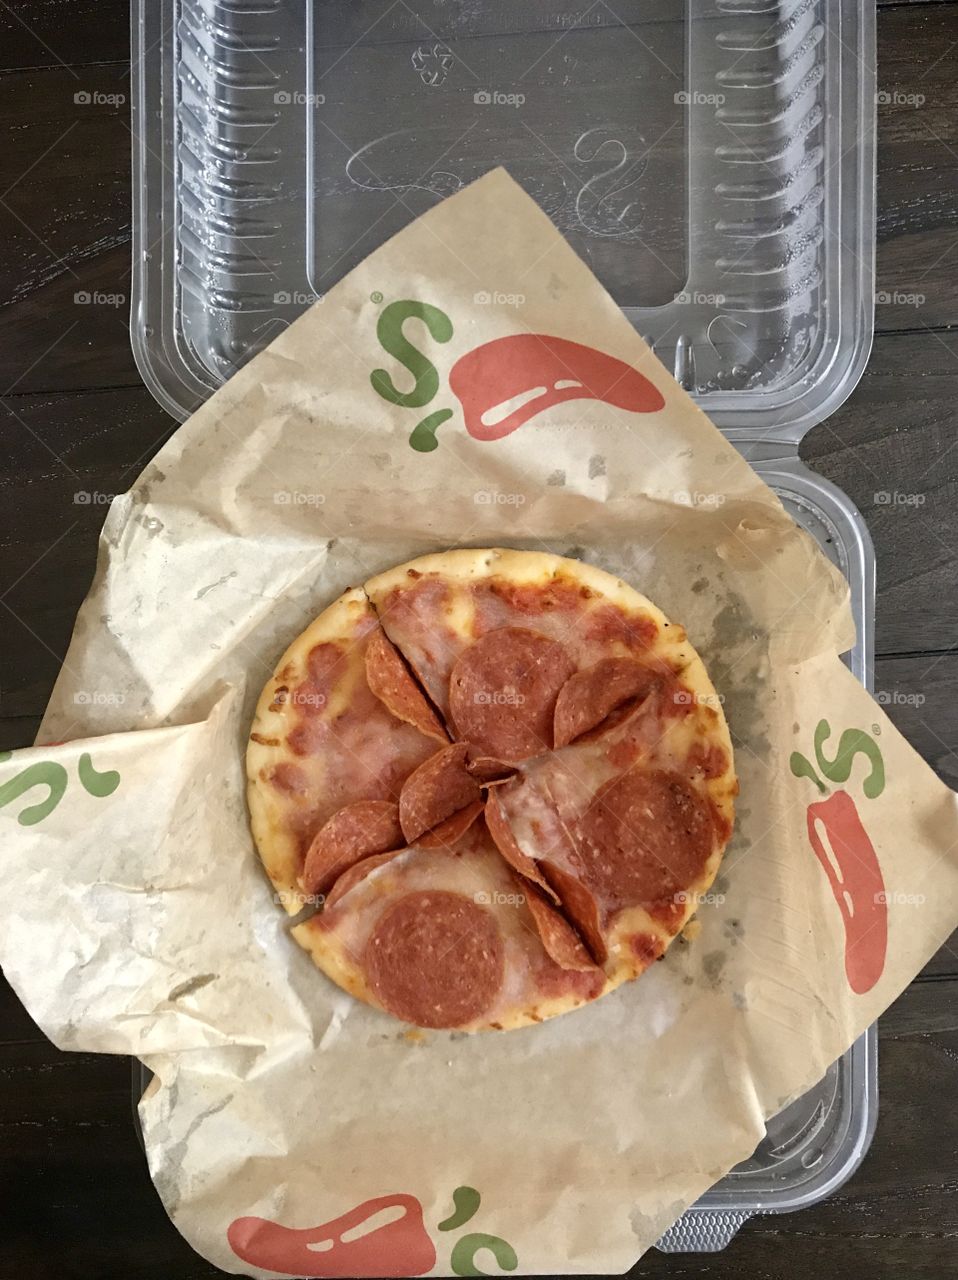 Chili’s restaurant take out pizza. Delicious cheese and pepperoni pizza. USA, America 